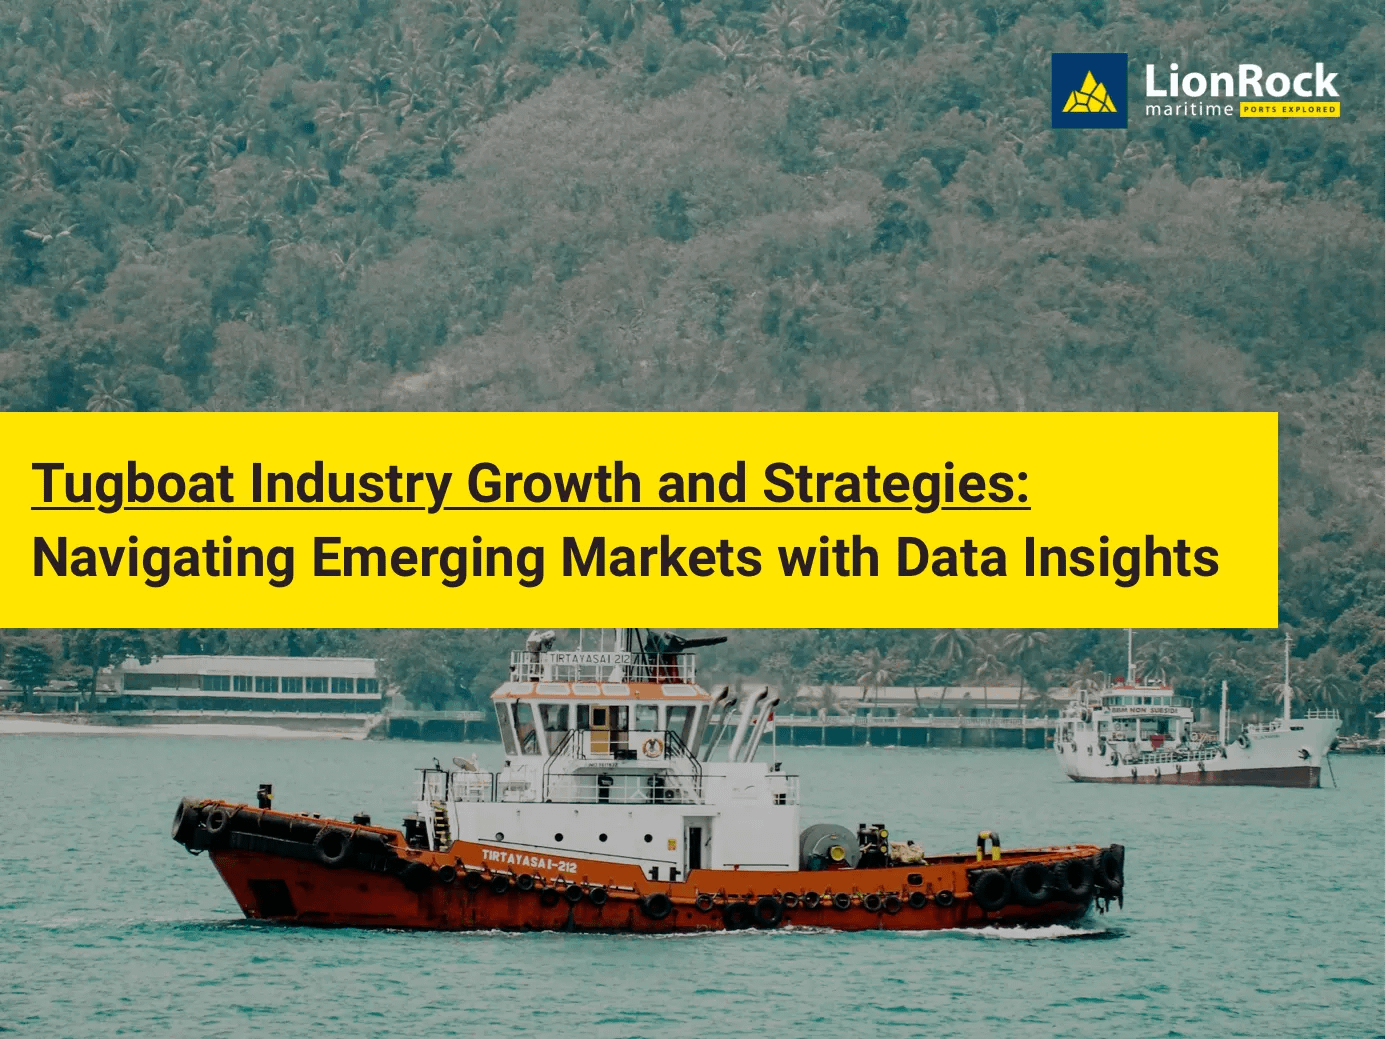 Tugboat Industry - shipping industry problems and growth | LionRock Maritime